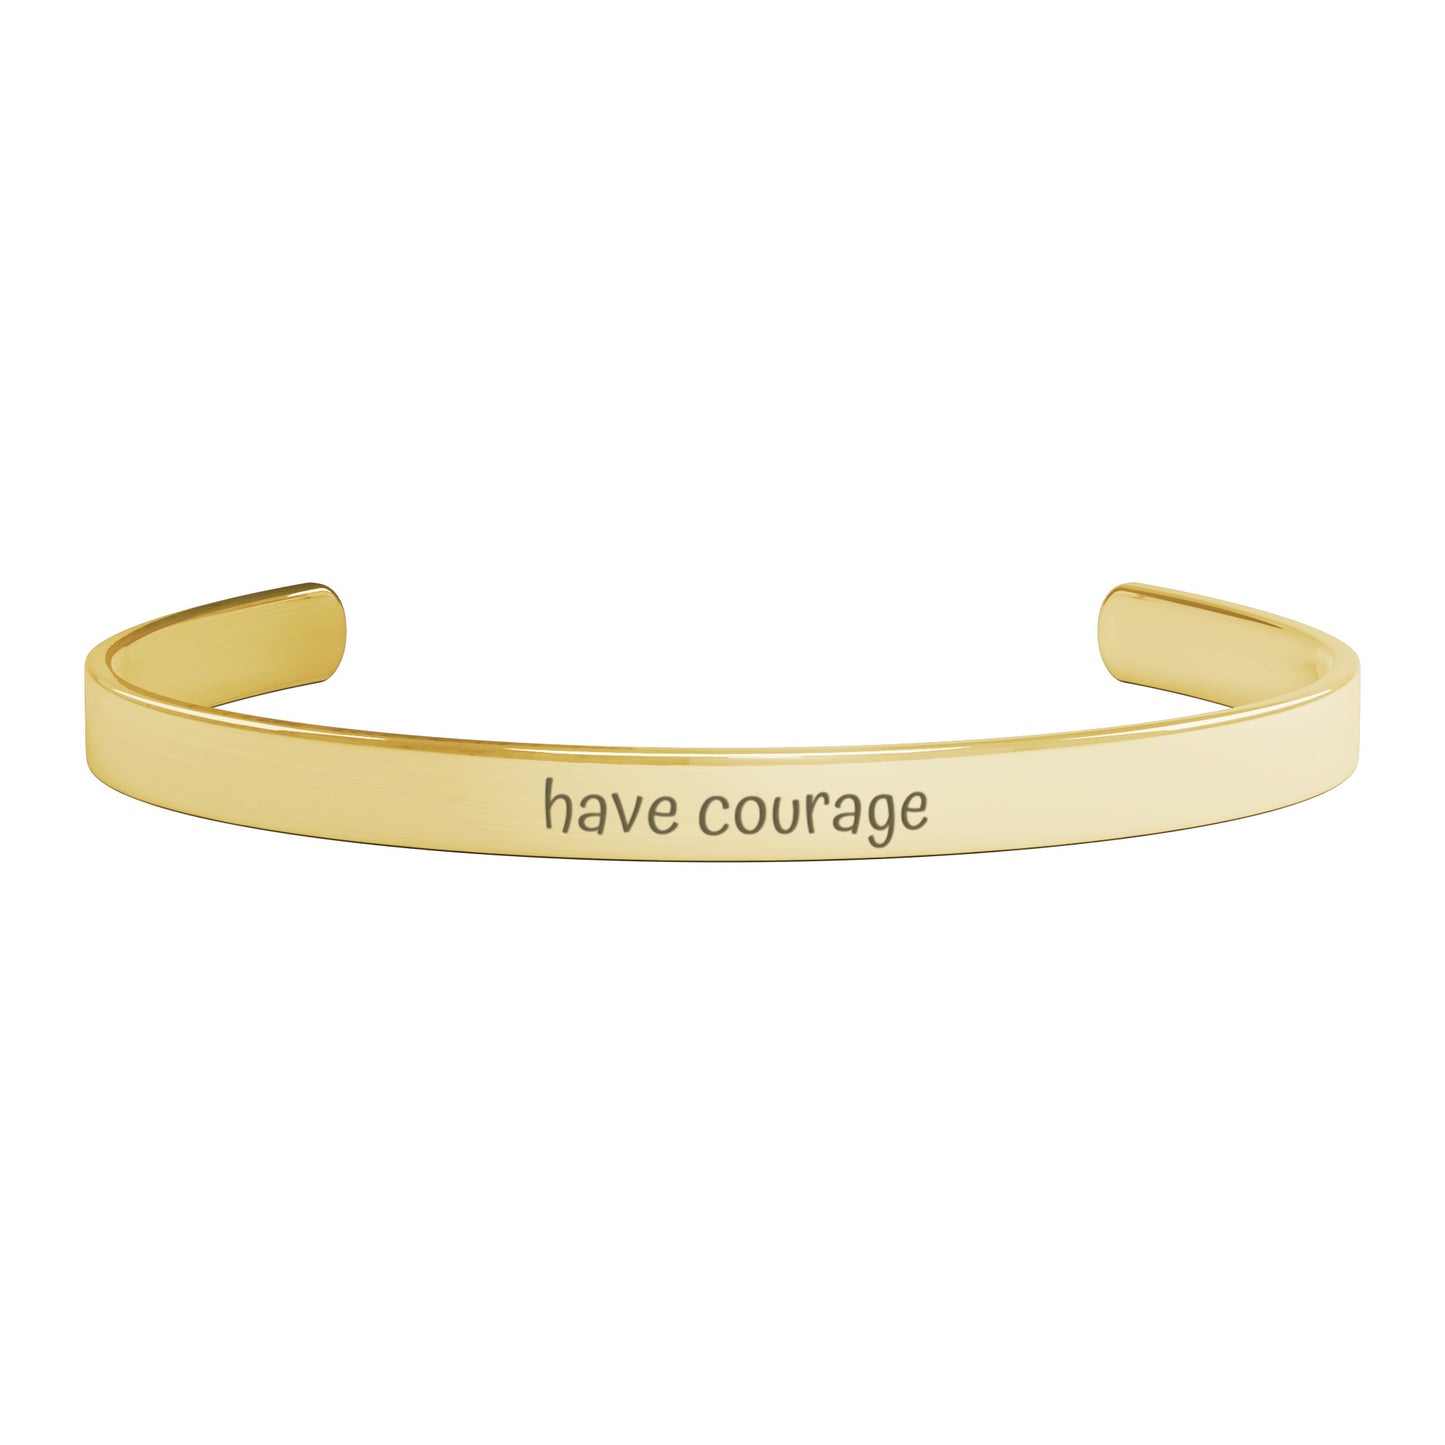 Have Courage Cuff Bracelet Gold, Rose Gold and Silver